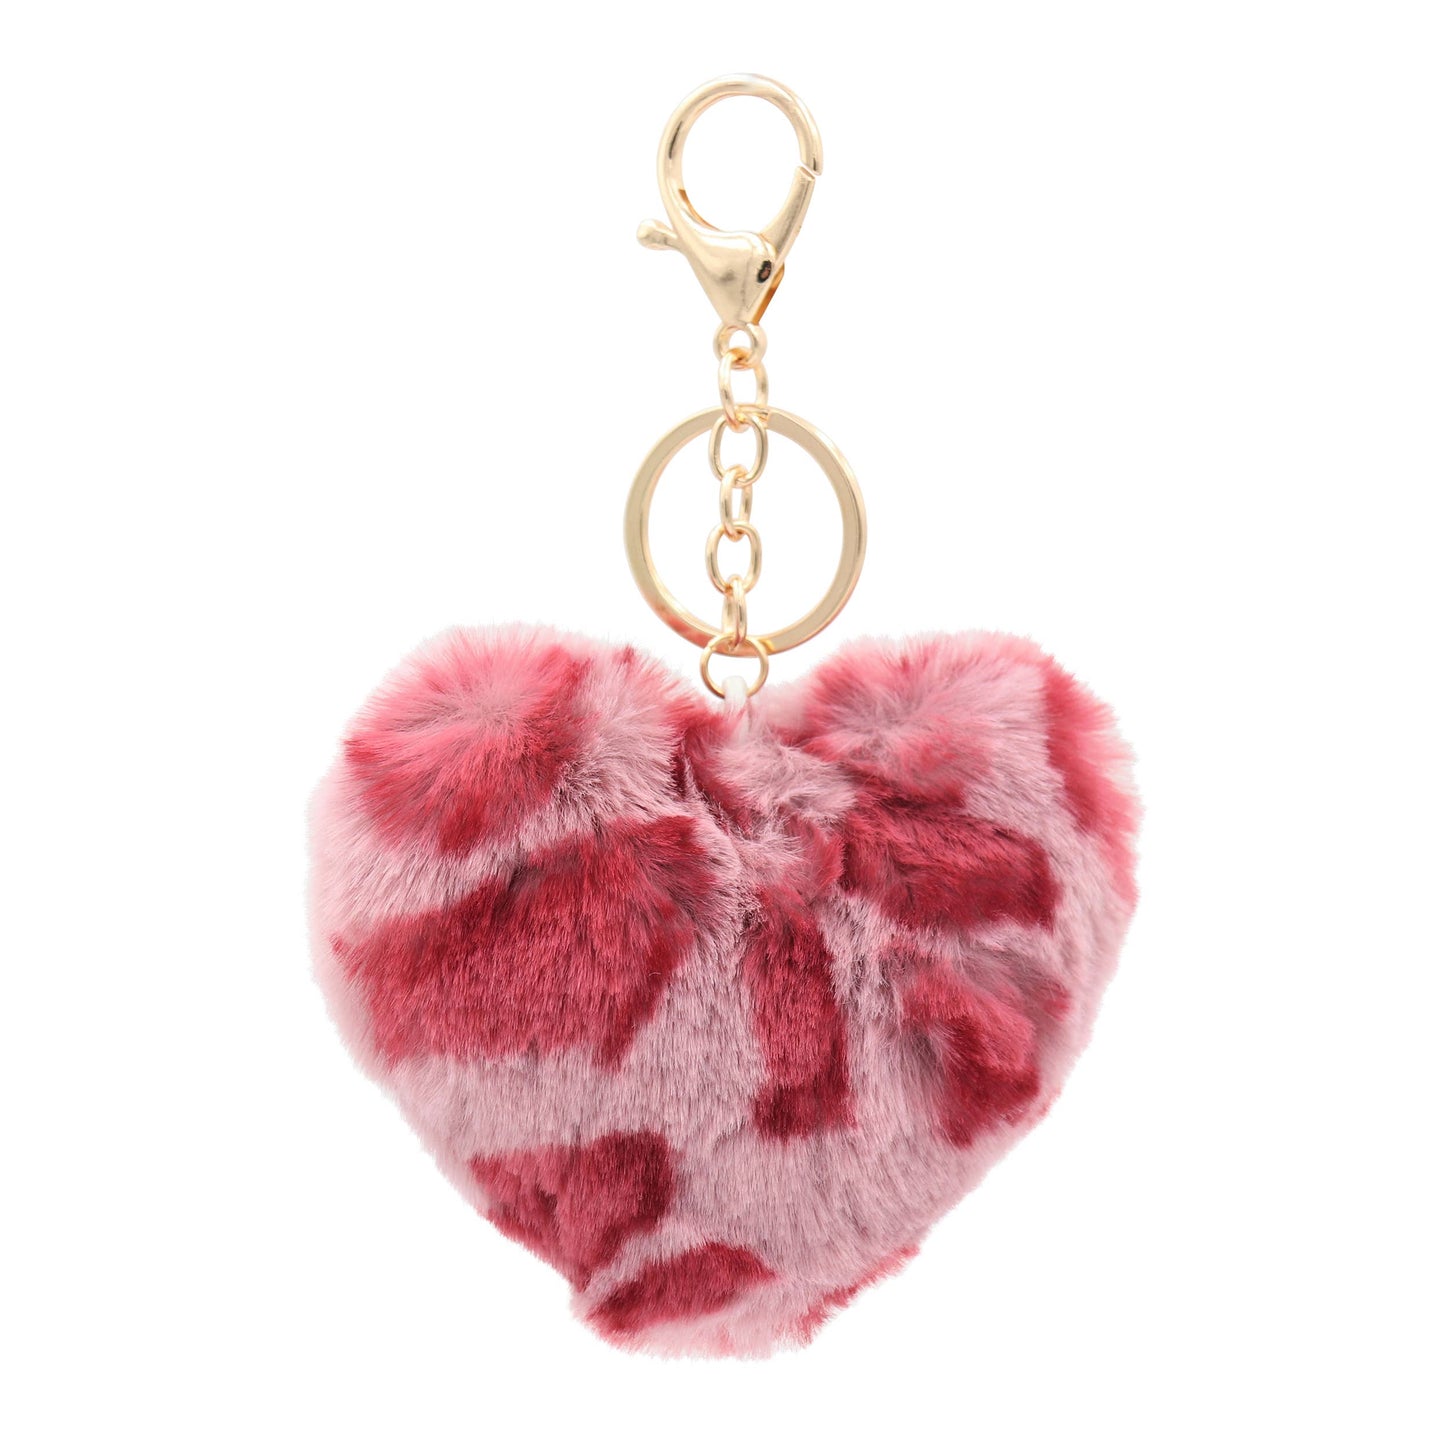 Image of Real Sic Fuchsia Leopard Pom Pom Fuzzy  Heart Key Chain for girl's bag and purse